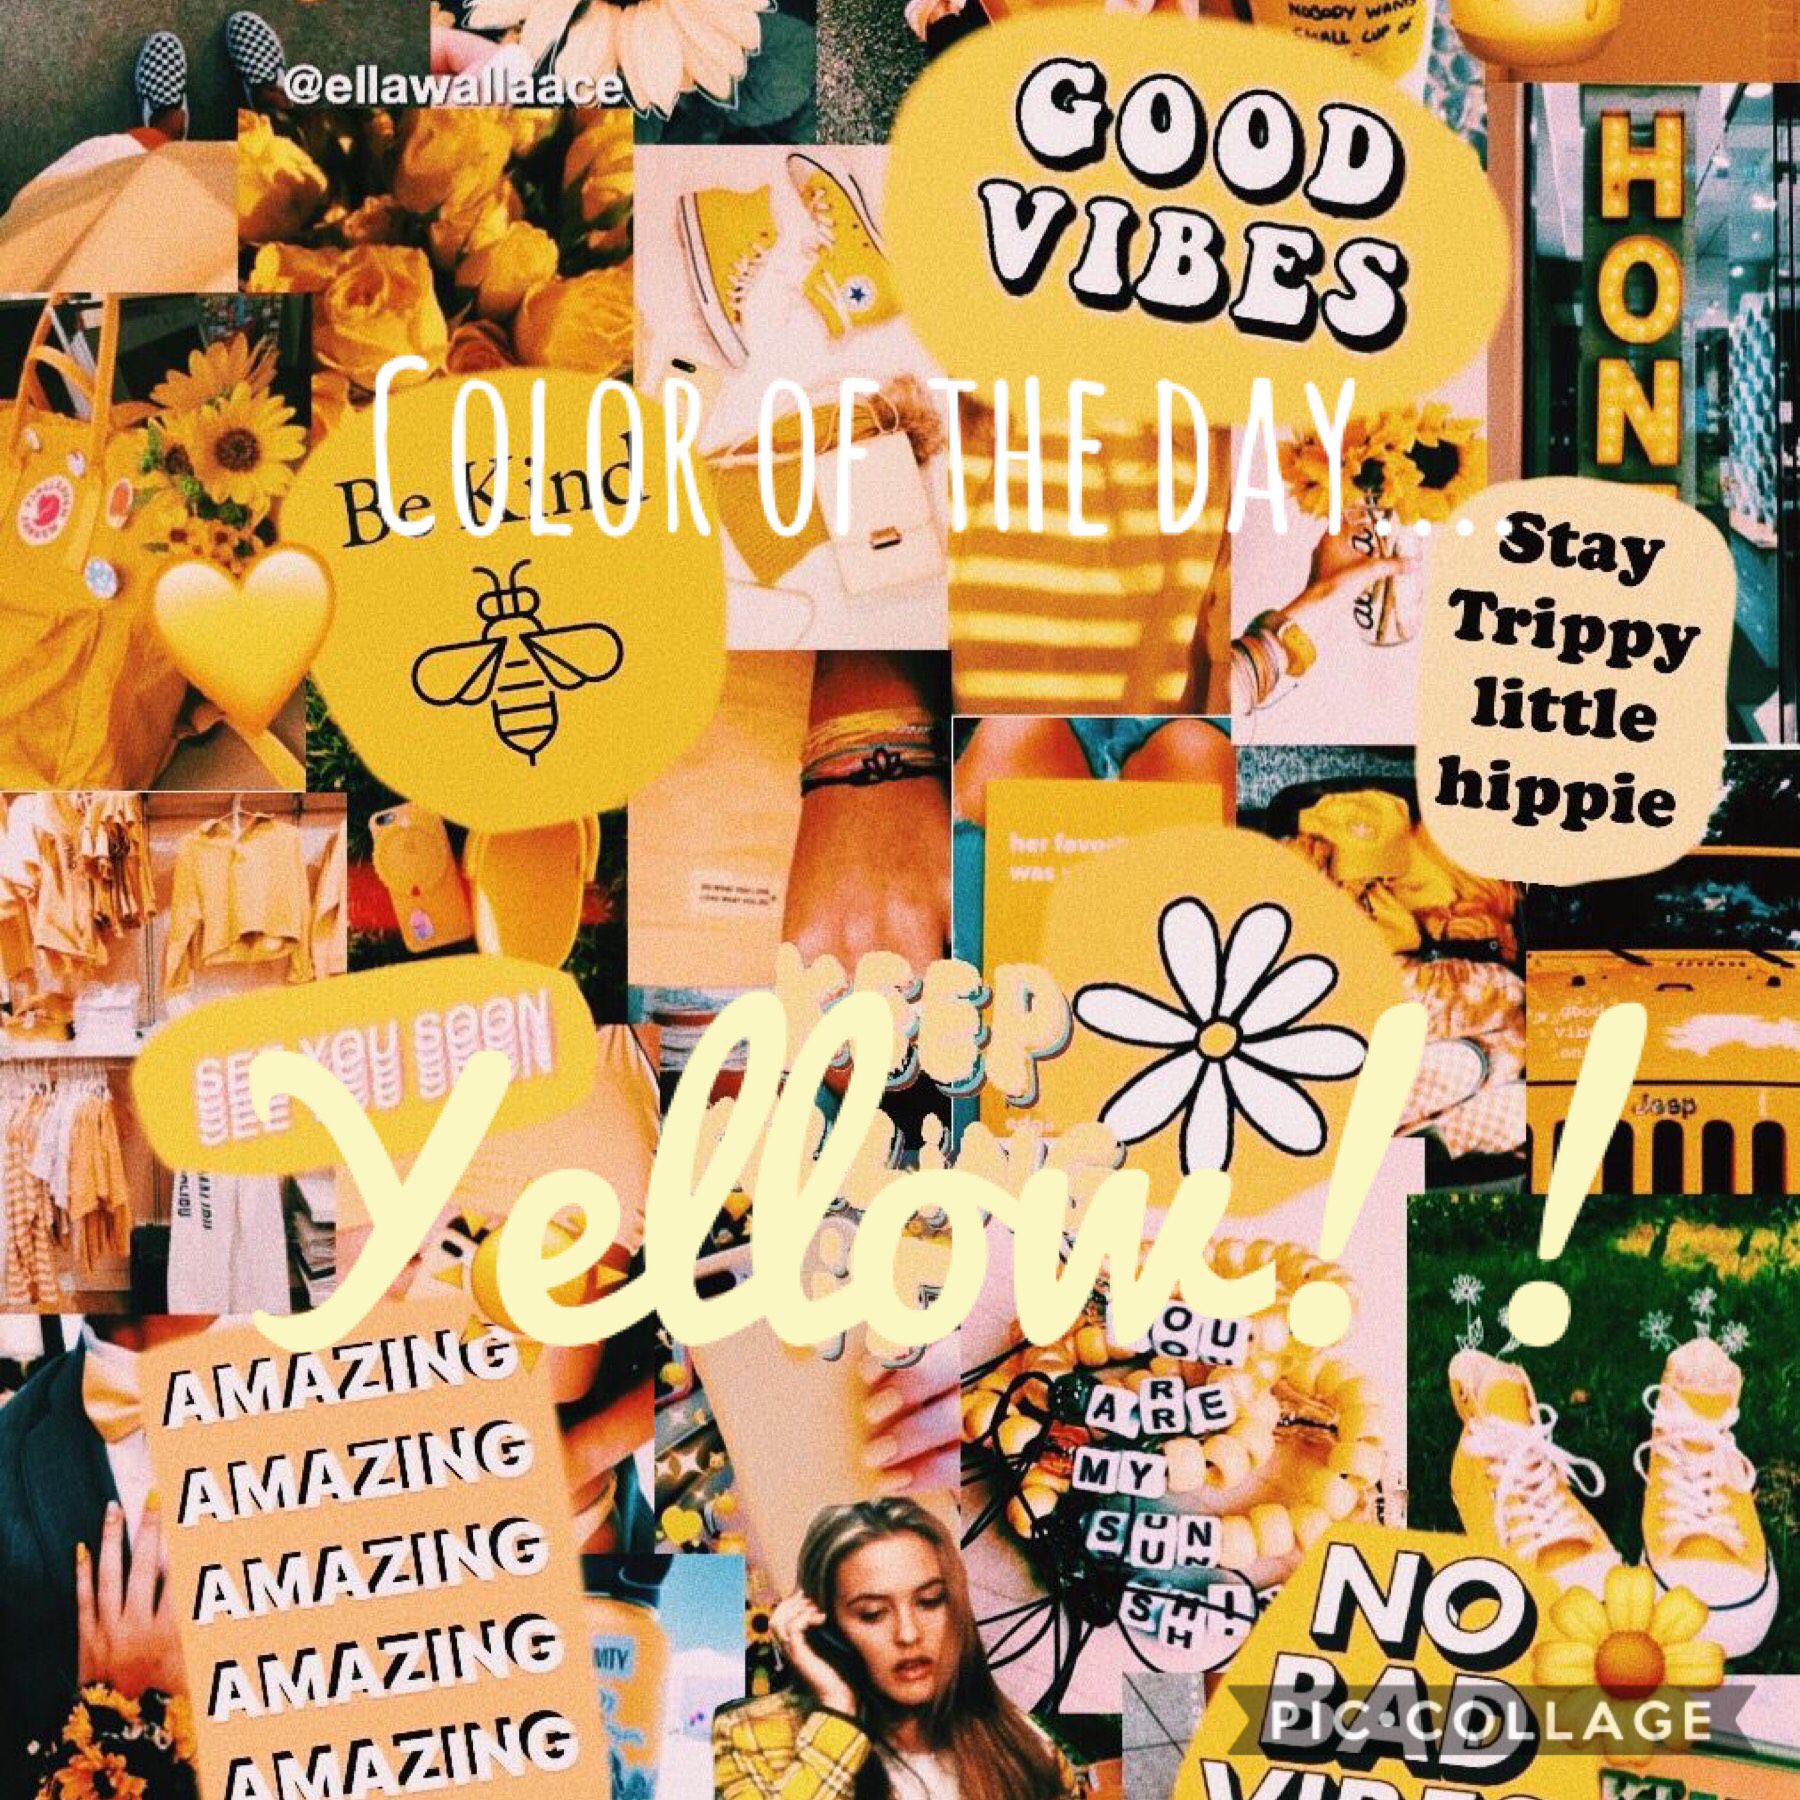 ⭐️Tap⭐️
Color of the day is YELLOW!!